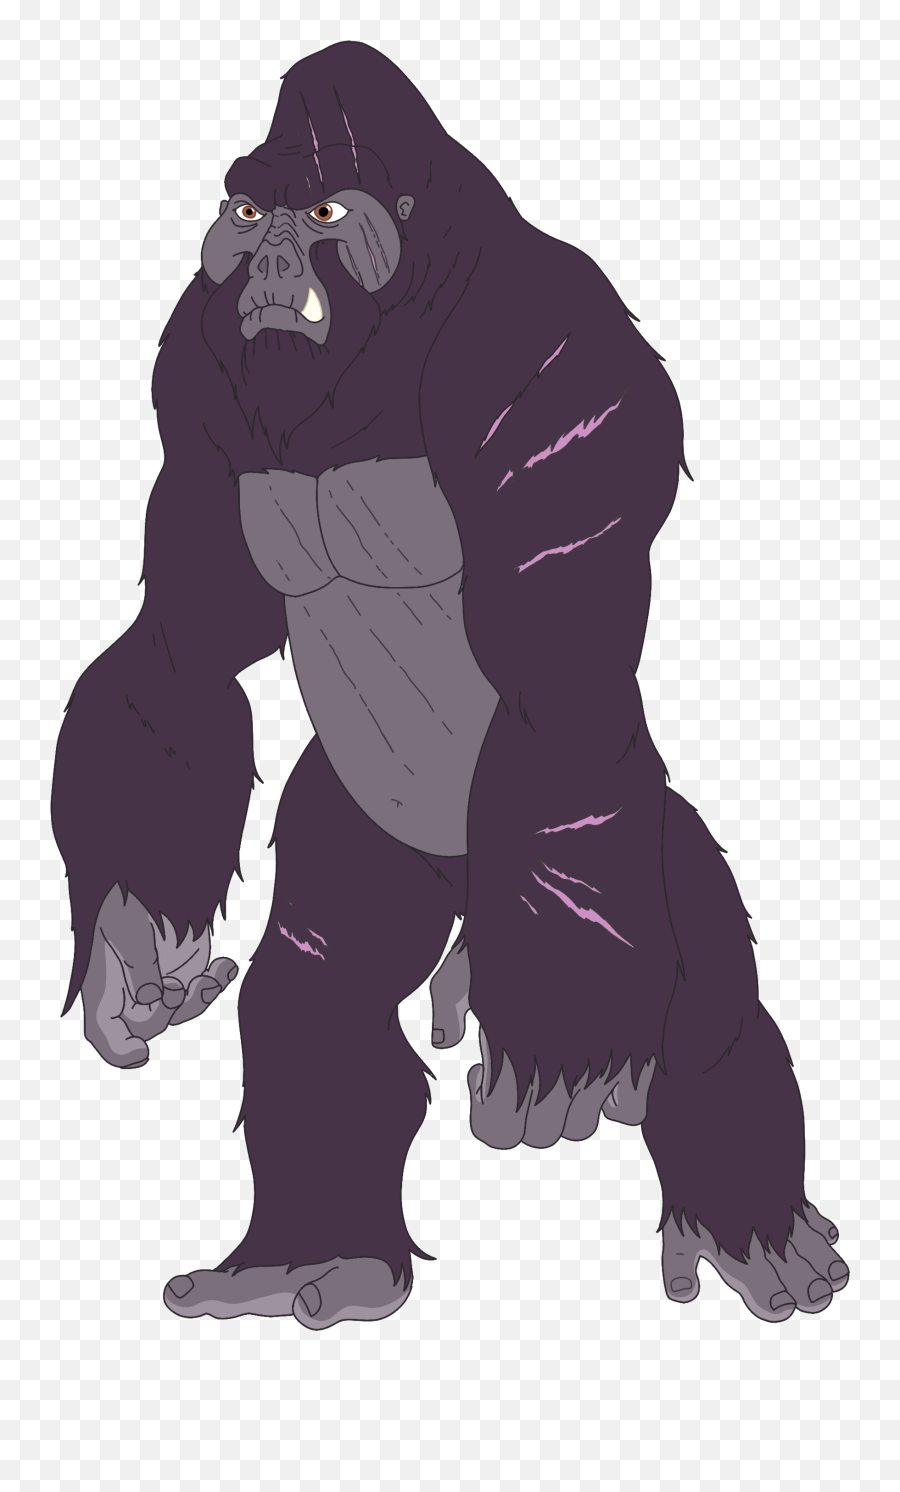 The Monsterverse Set Kong Up To Fail From The Start Rkingkong Emoji,Gorillas Emotions